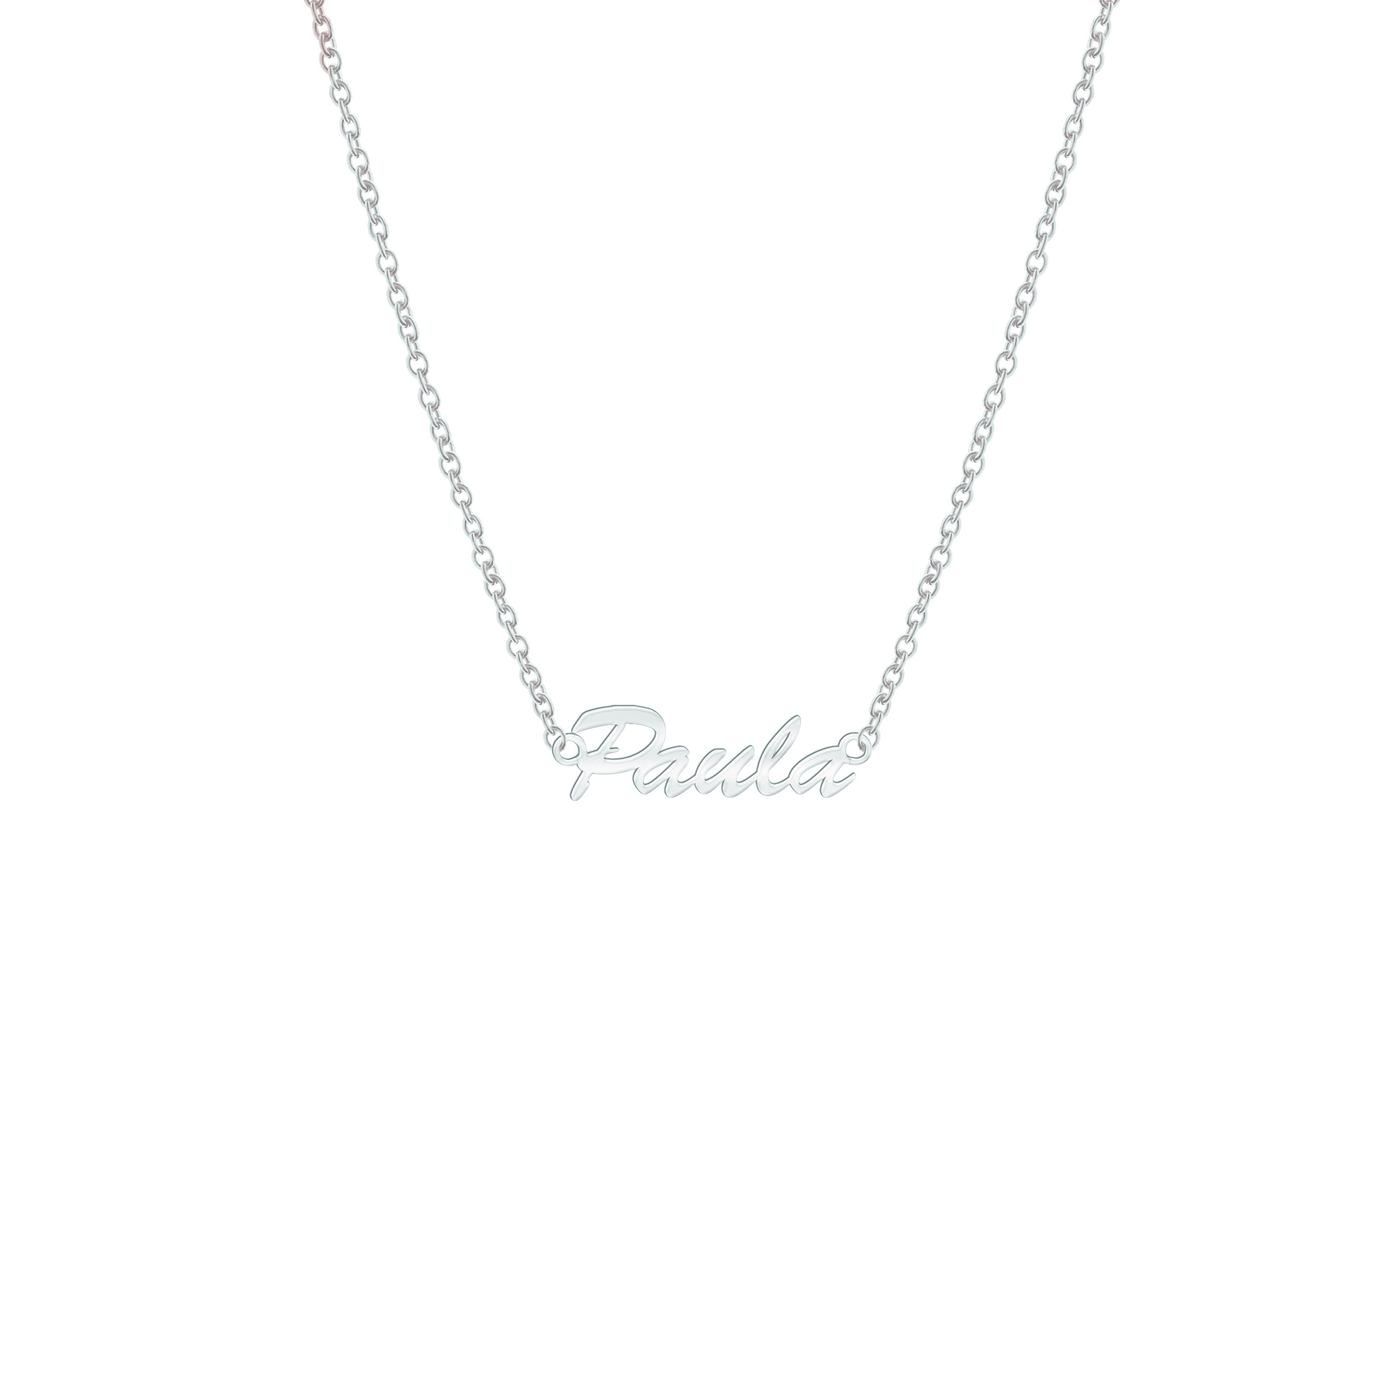 Name necklace "Handwriting" (Silver)